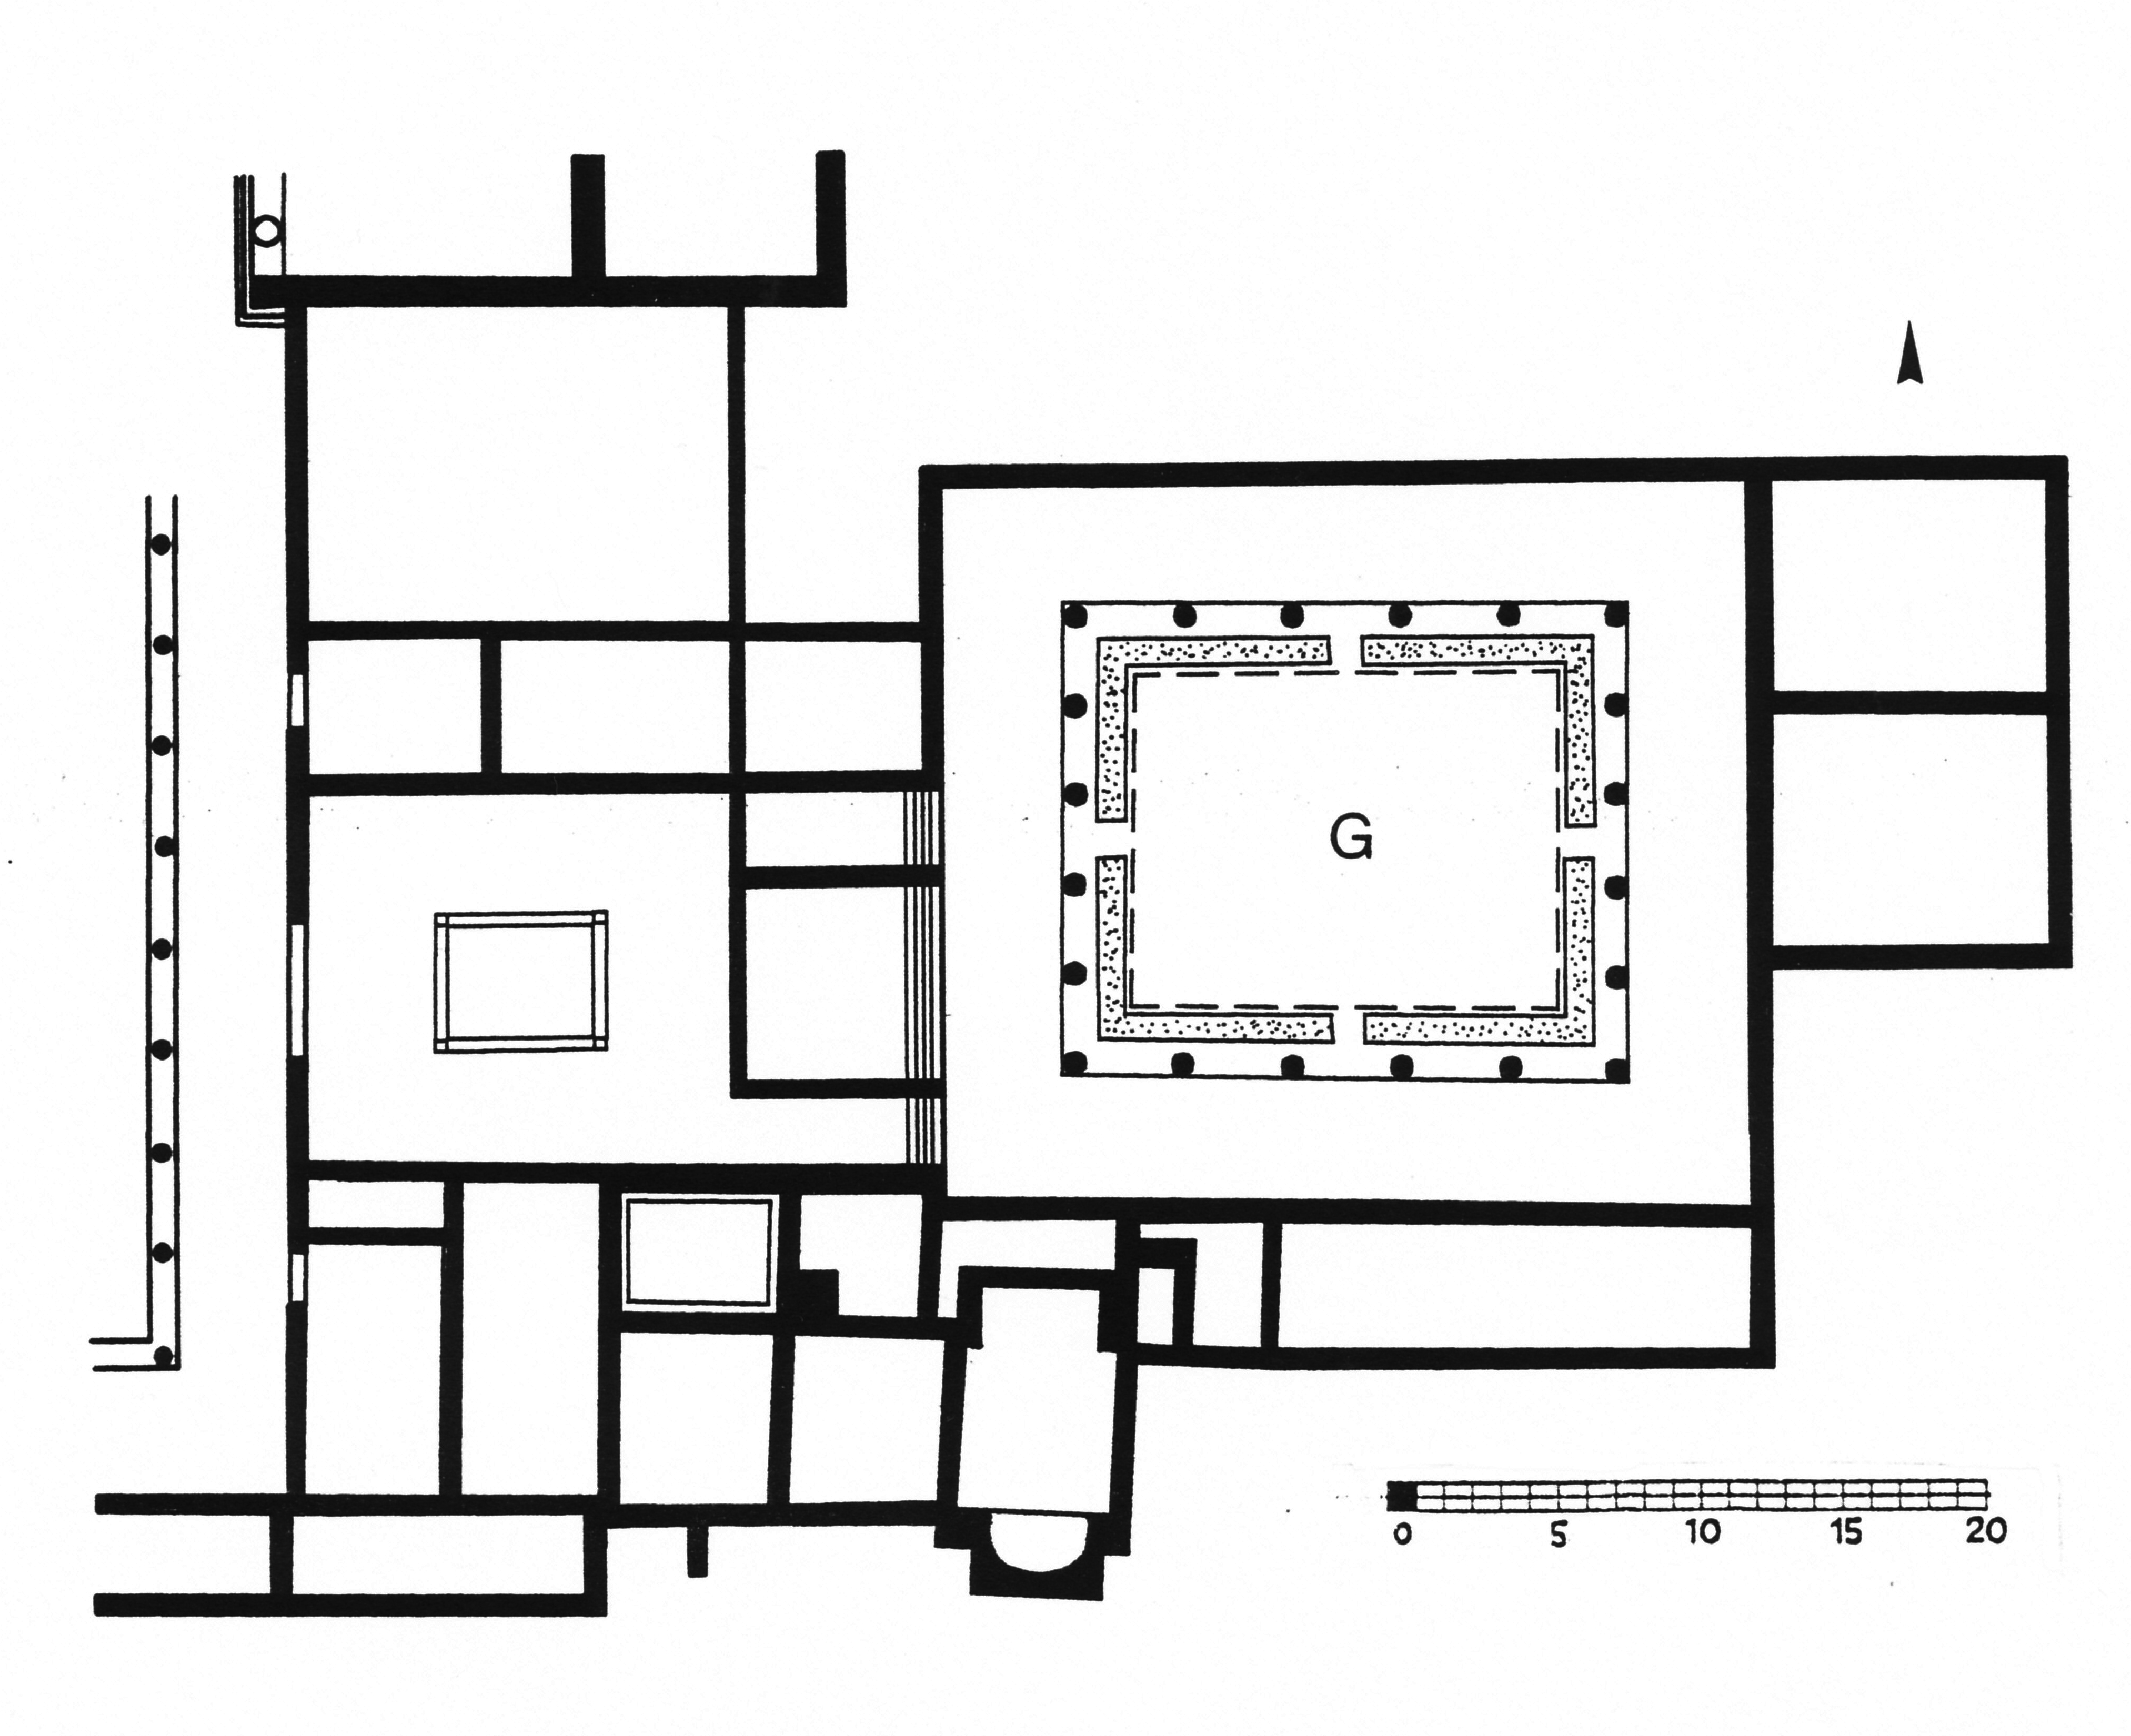 Plan of the ‘House of Nero’ with its garden courtyard and water channel